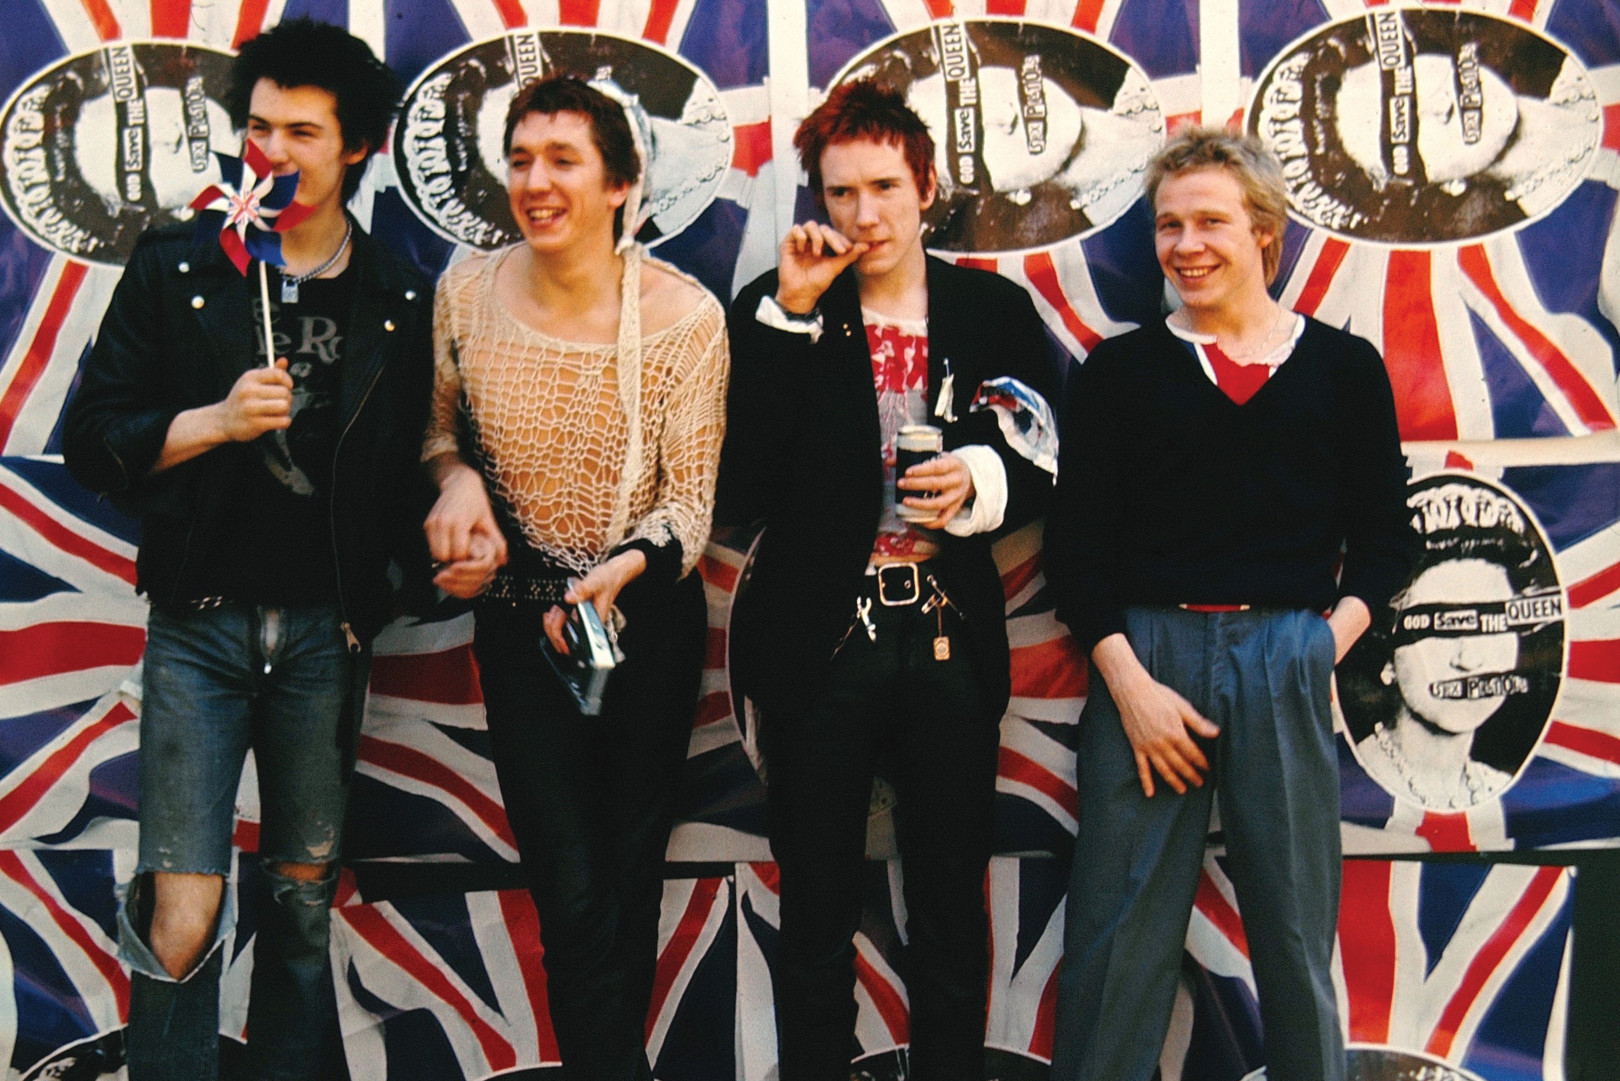 Sex Pistols release "God Save The Queen Revisited" video